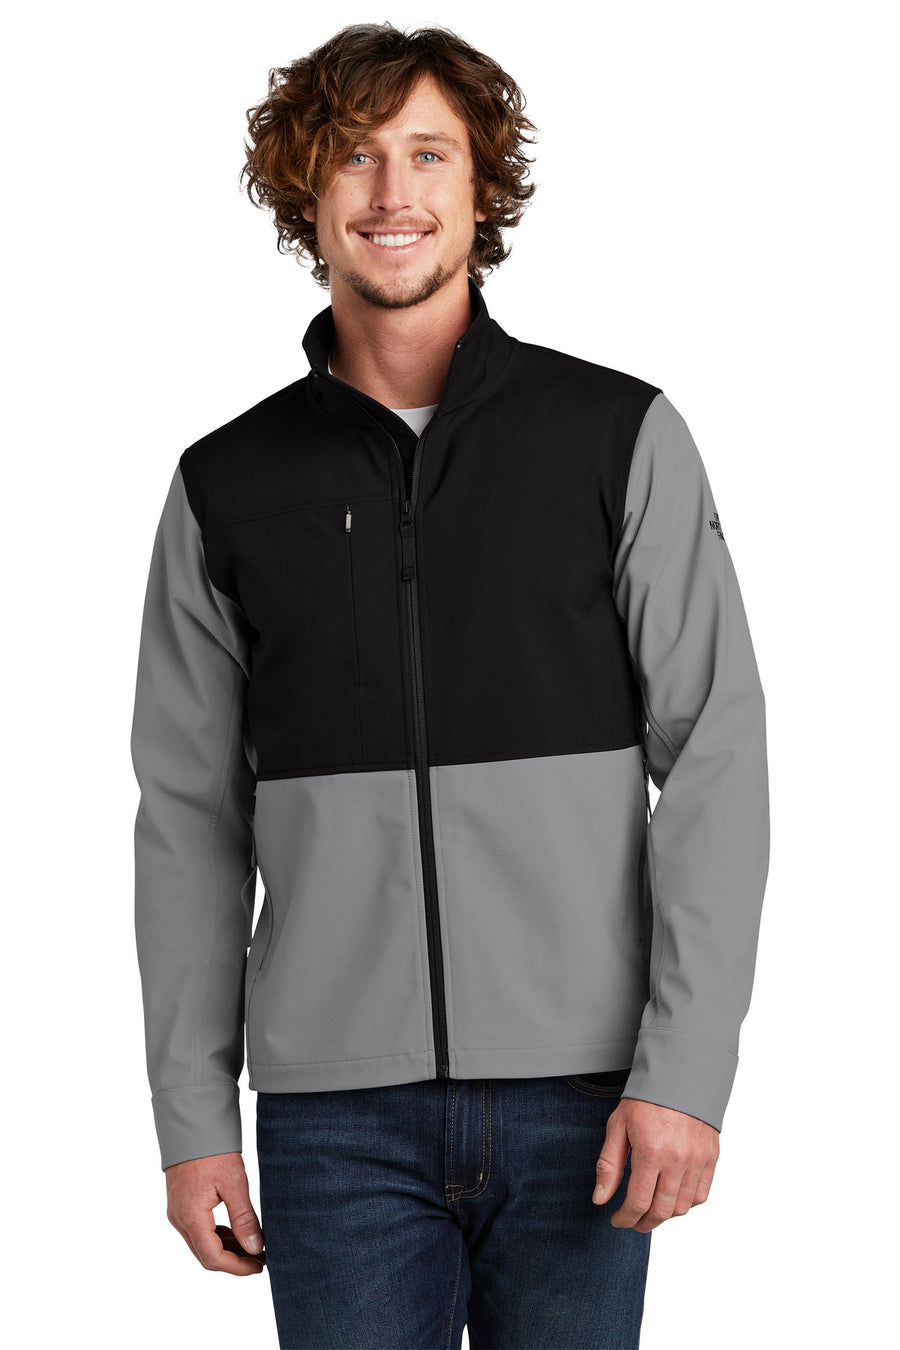 The North Face Castle Rock Soft Shell Jacket.